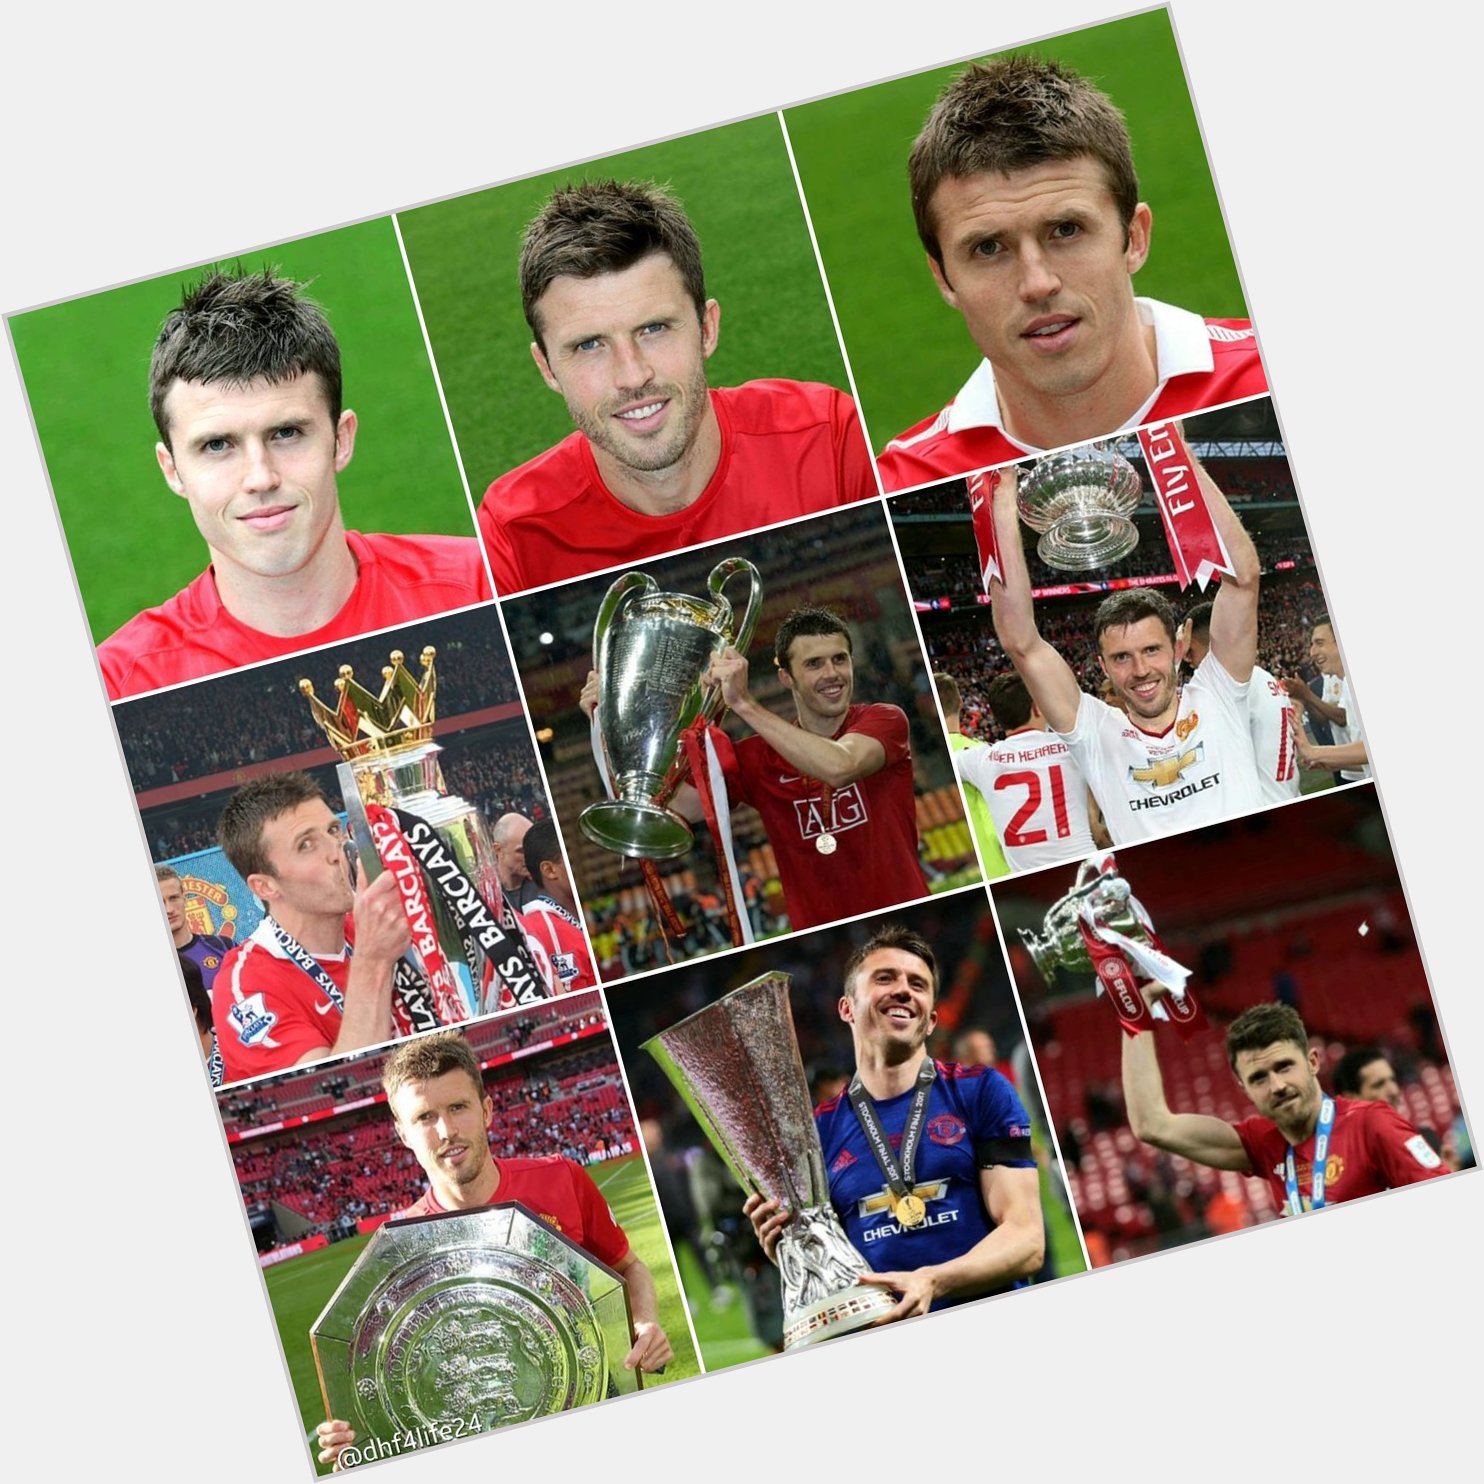 Happy 41st Birthday   on 28th July 2022 to Michael Carrick - What a Player and LEGEND... 